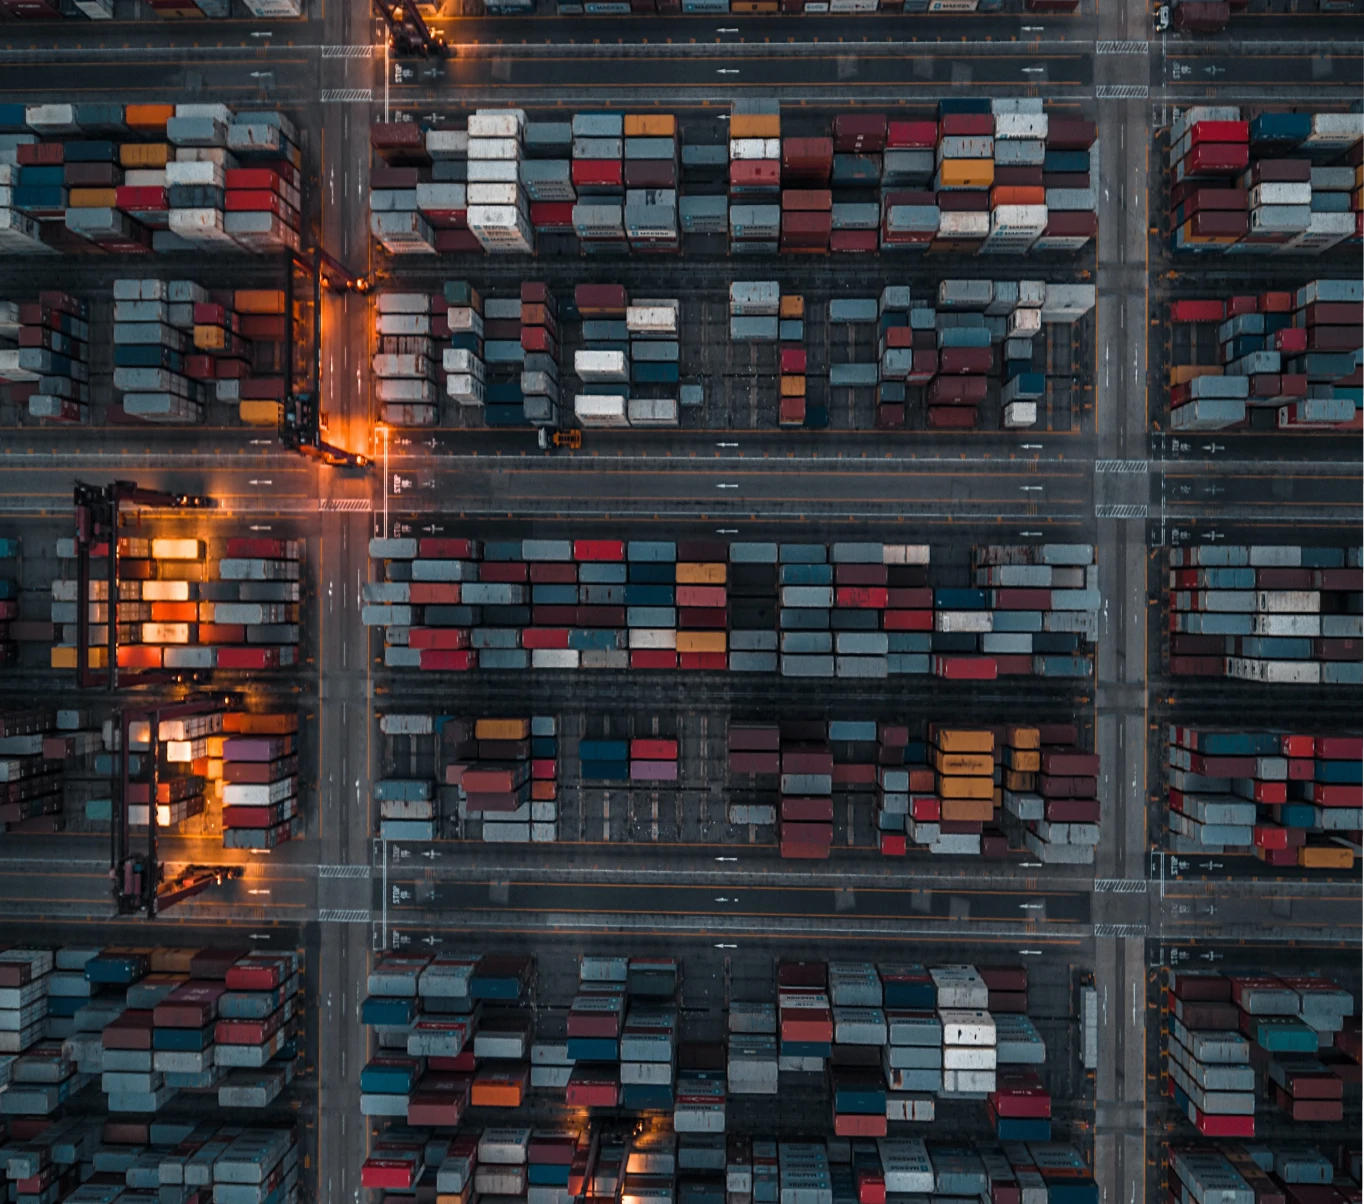 A top-down view showing a shipping yard, with hundreds of shipping containers in sight